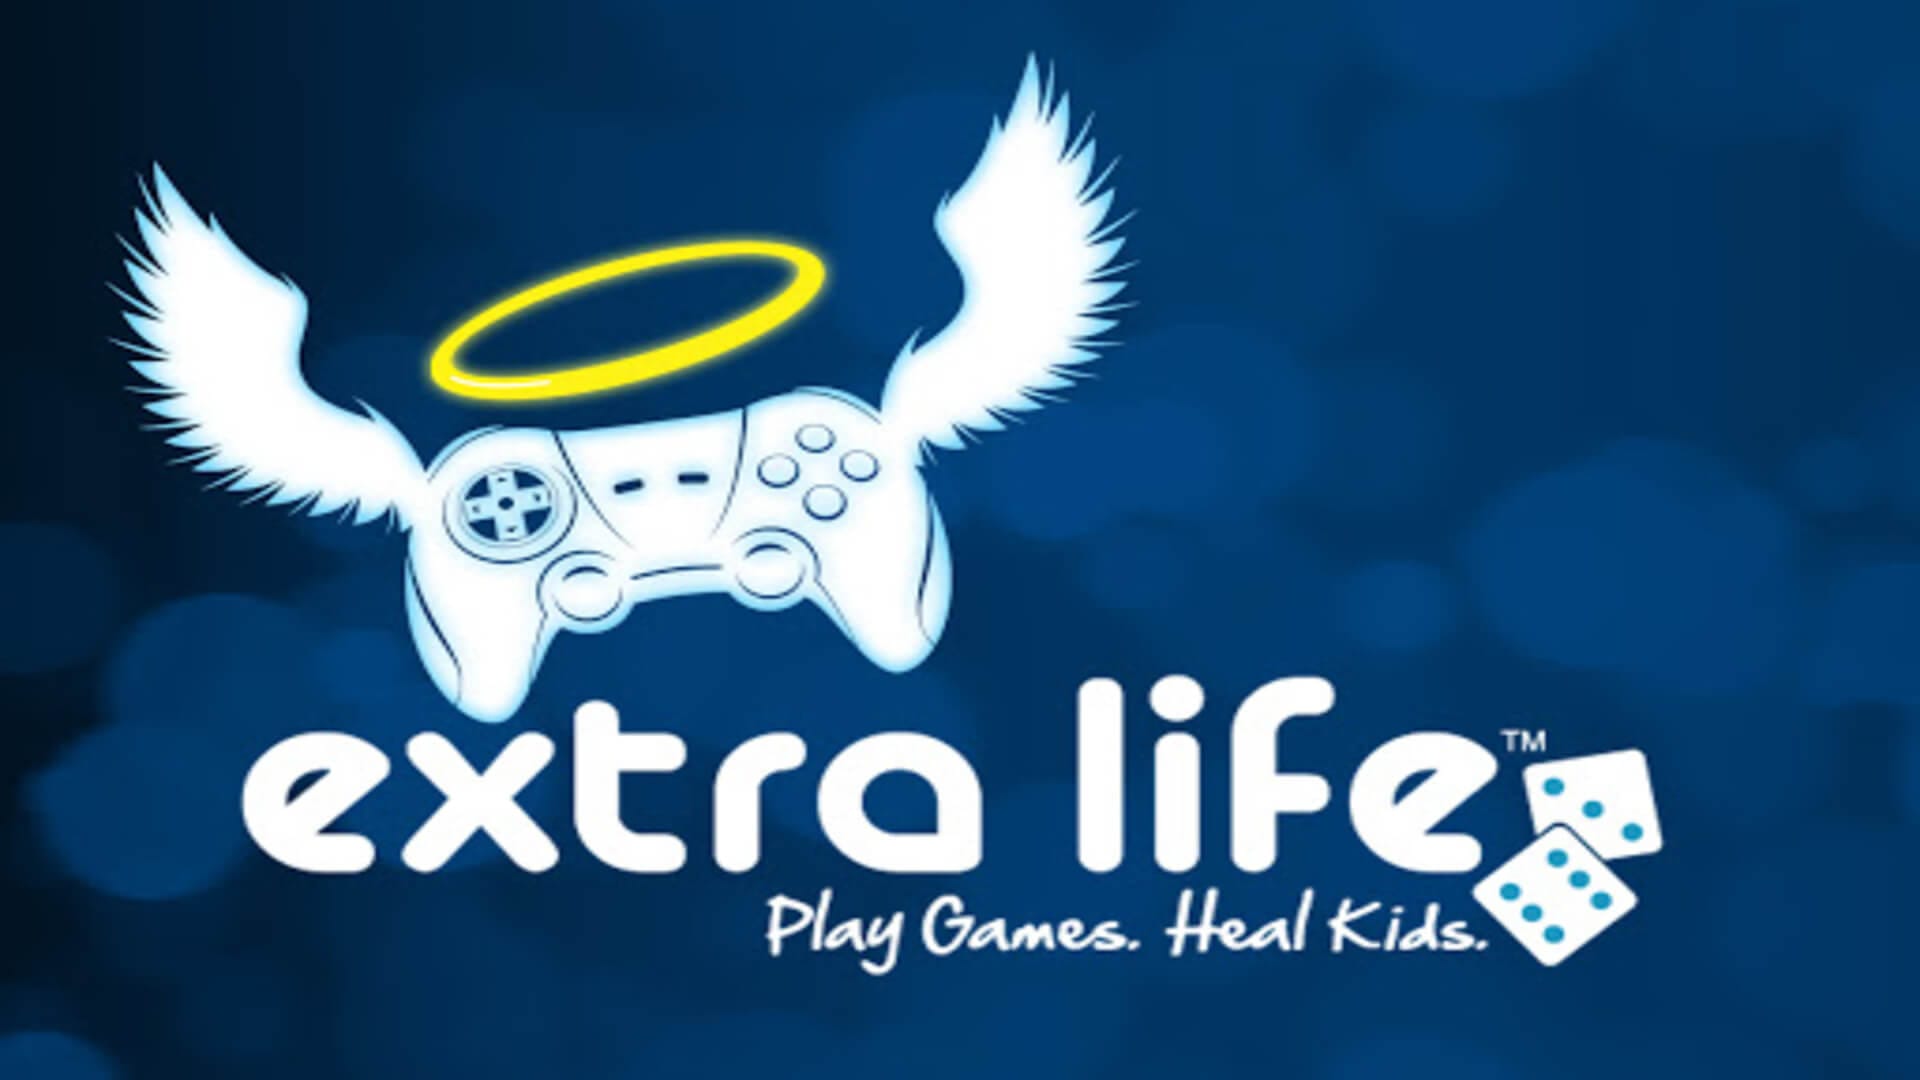 The logo for Extra Life.